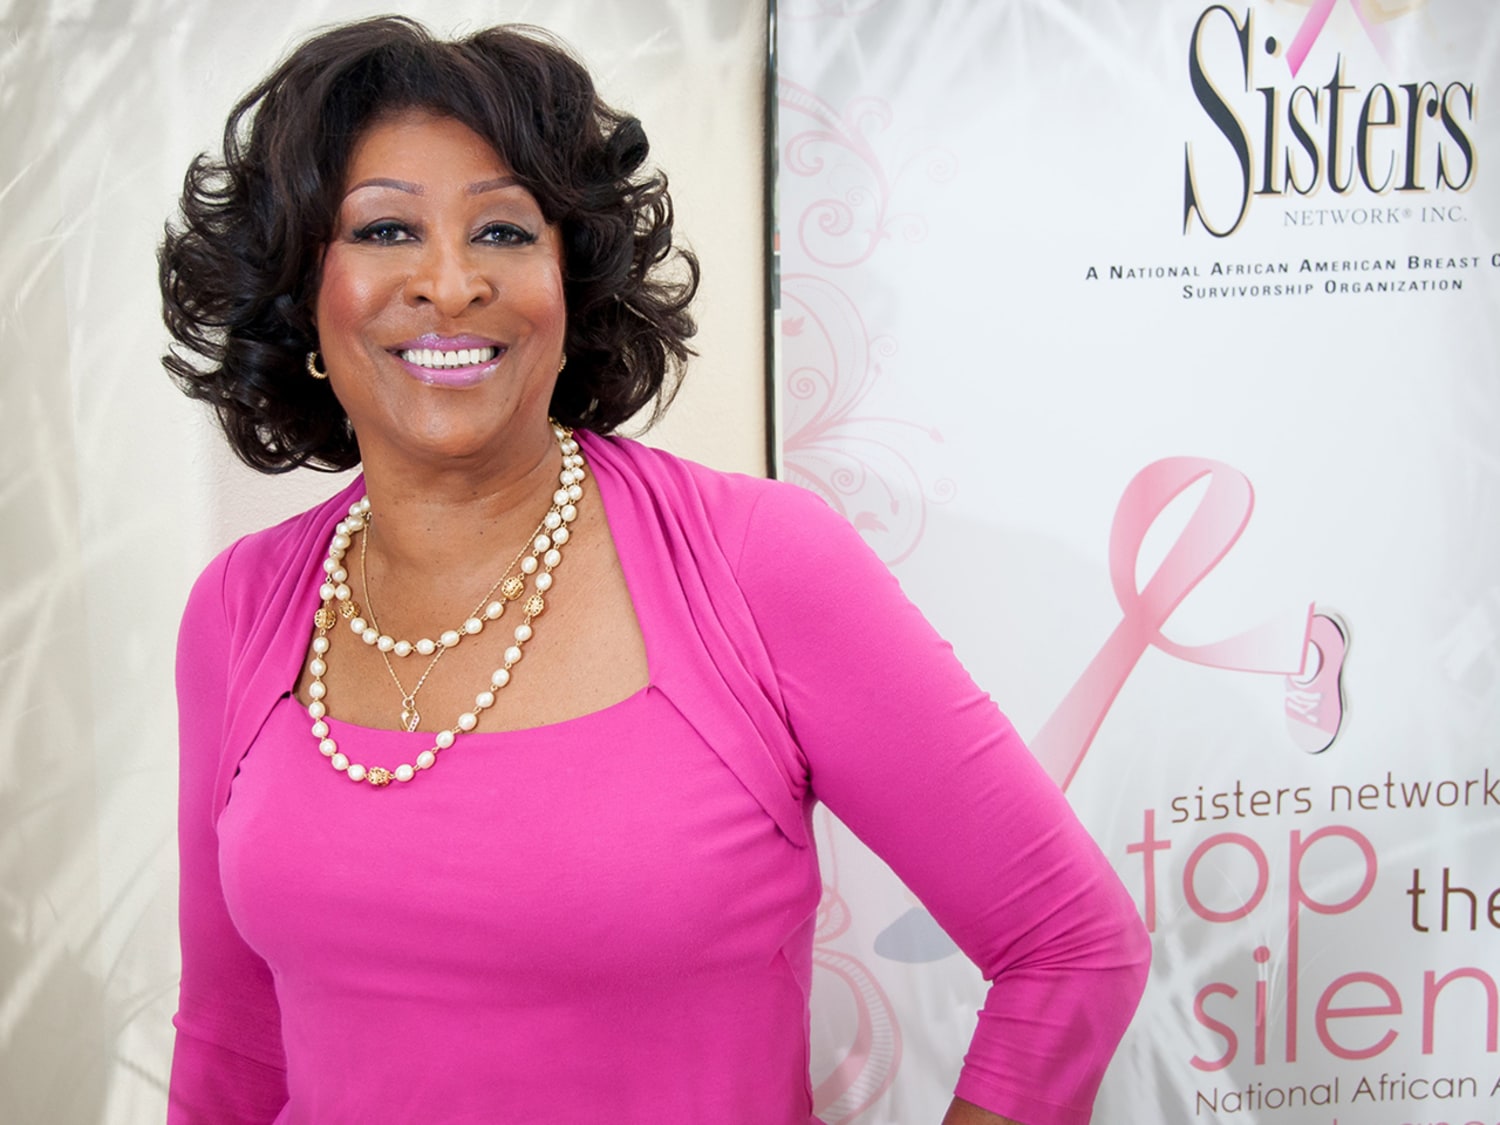 Why breast cancer kills more black women: They're sicker